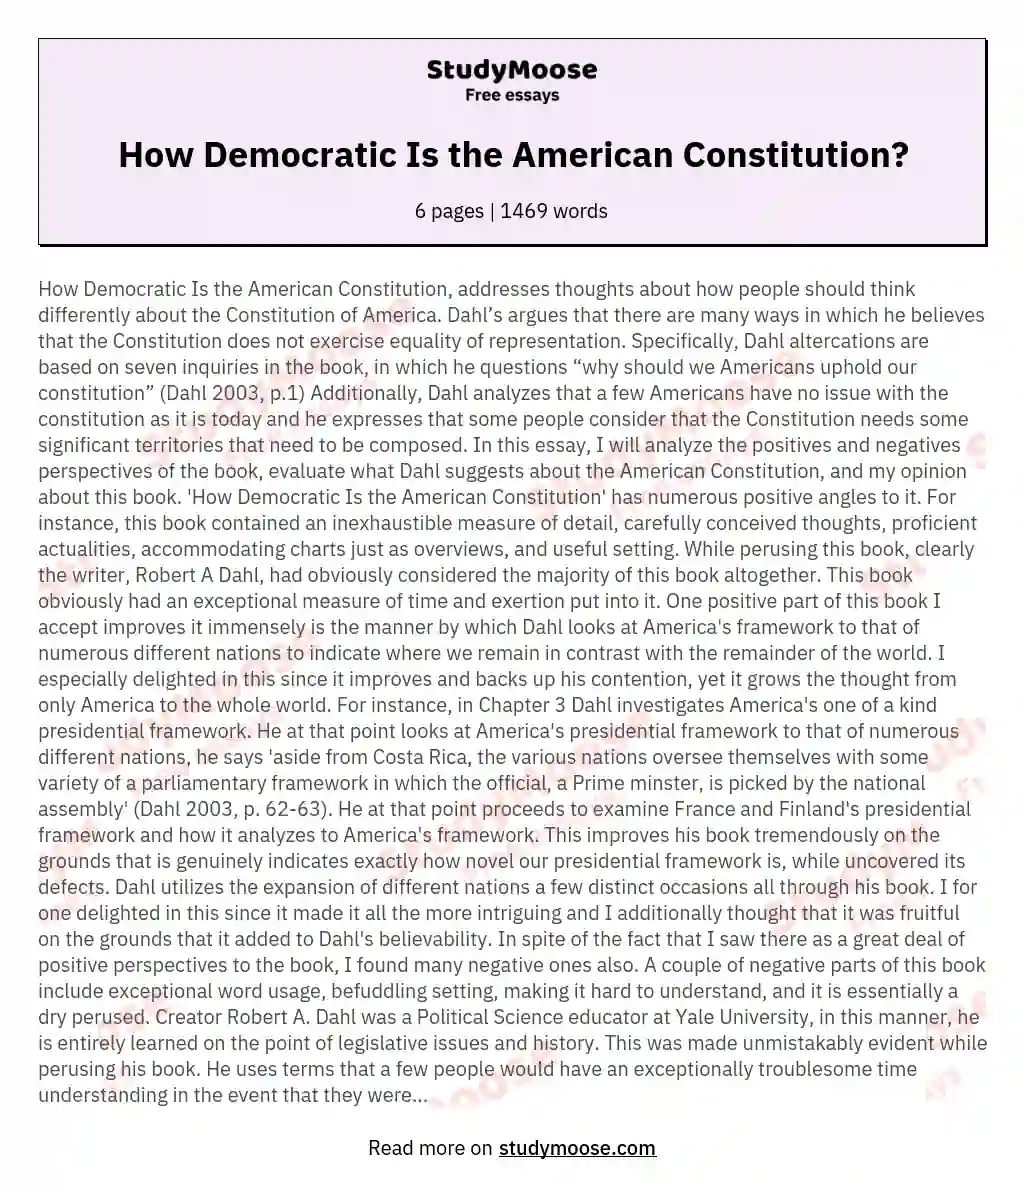 How Democratic Is the American Constitution? essay